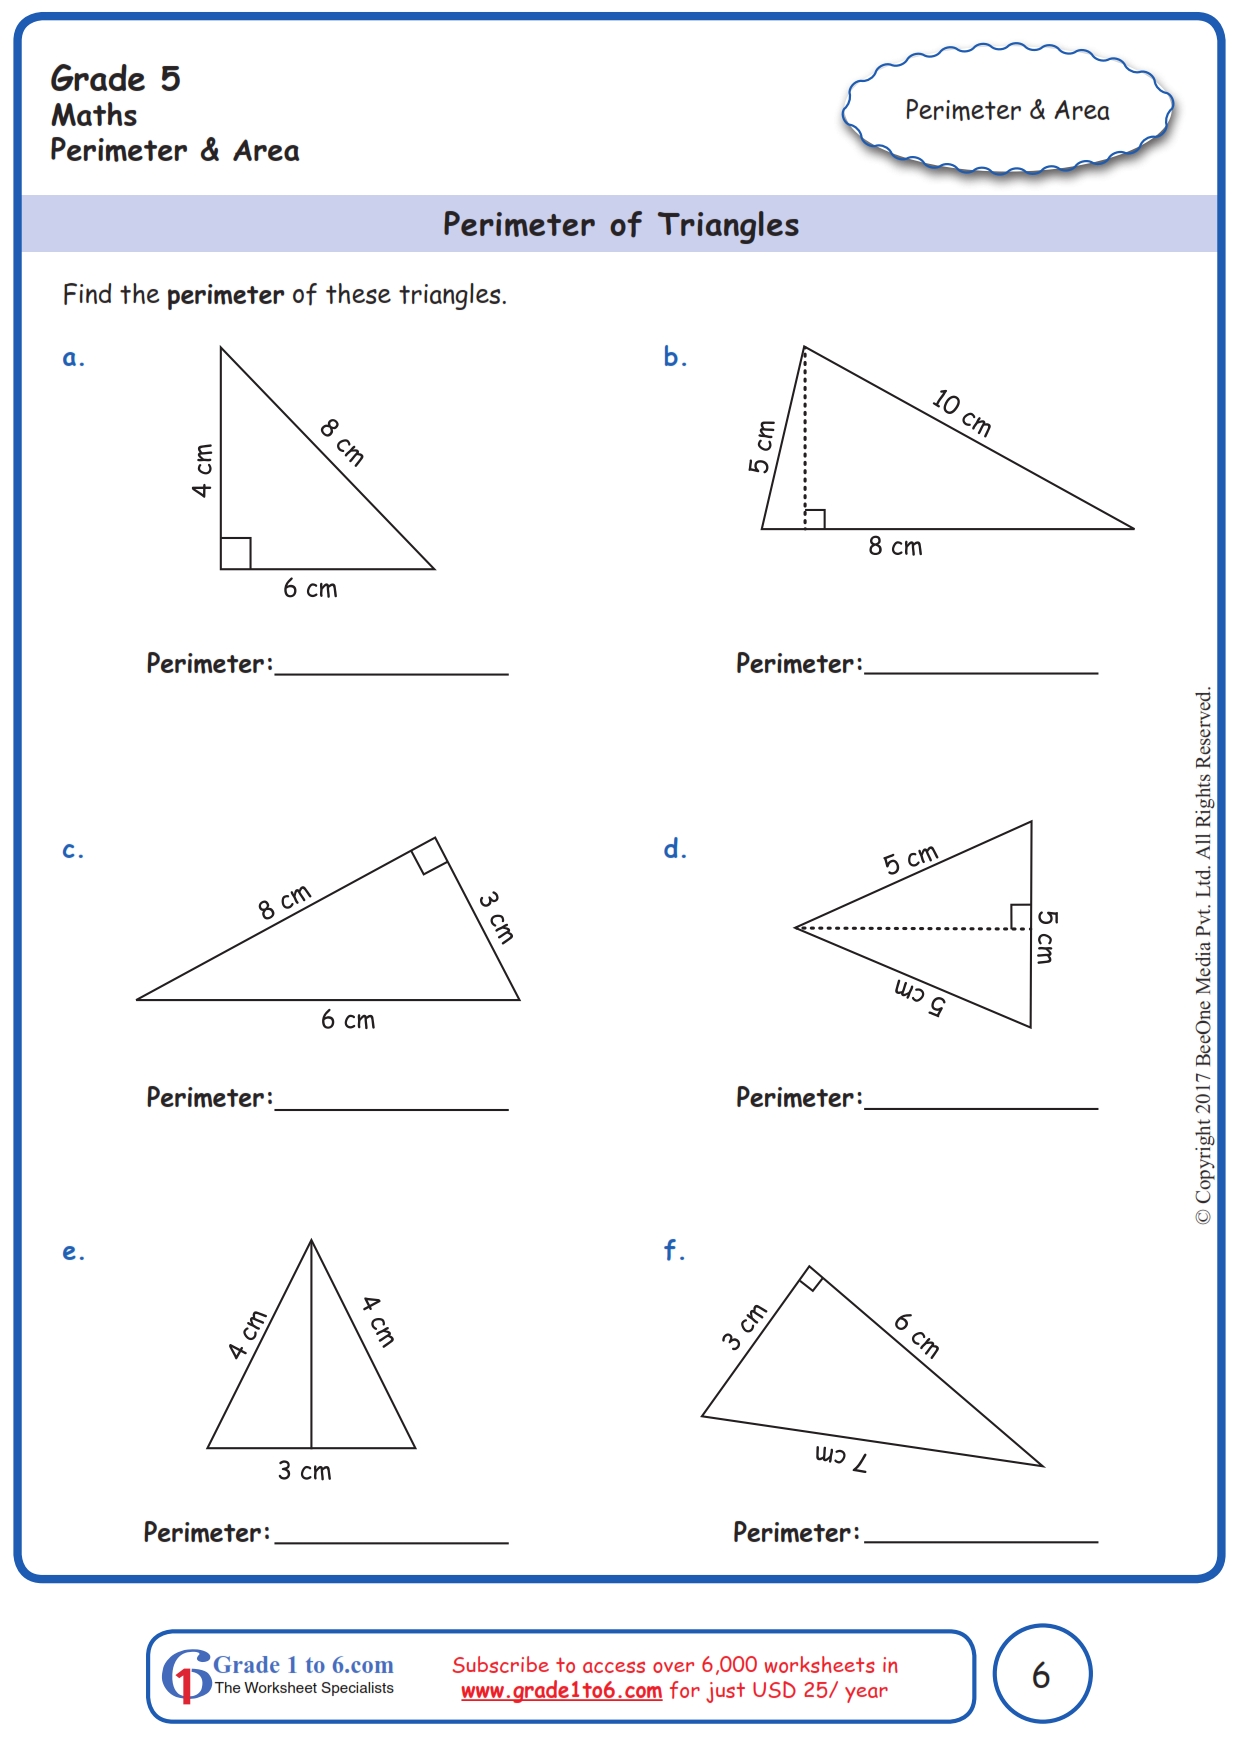 triangles-worksheet-5th-grade